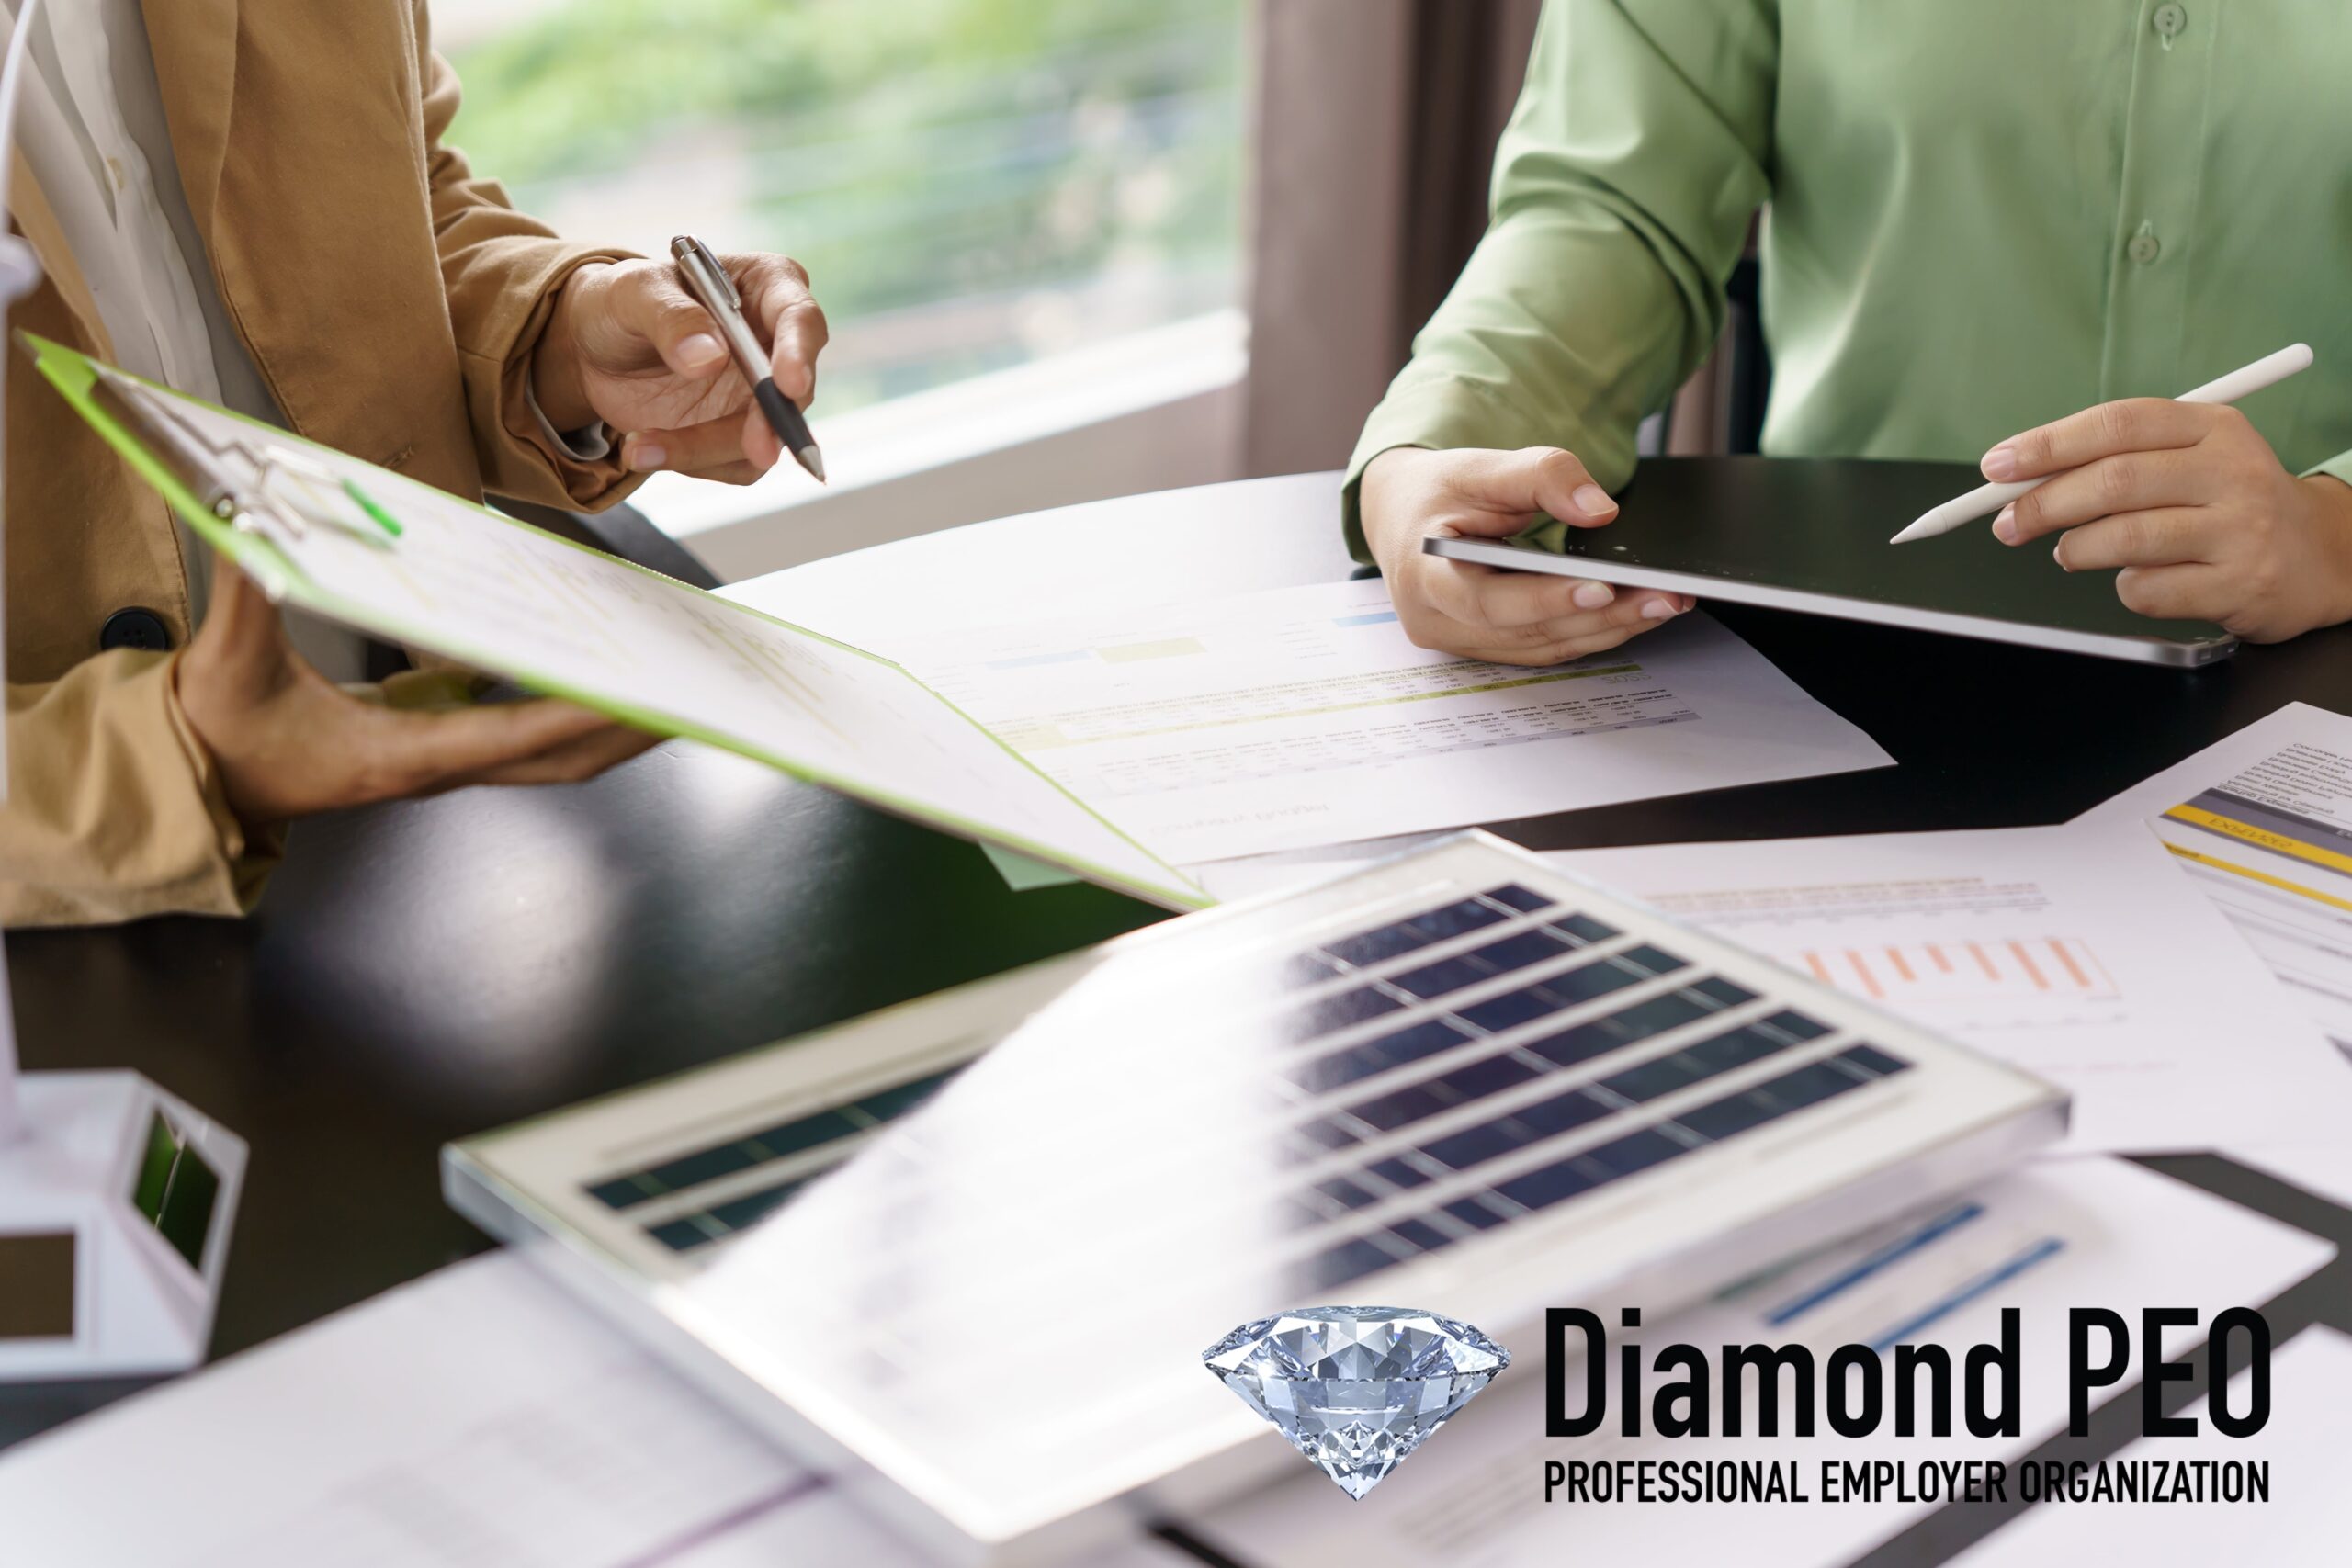 Tough times call for tough measures. Five Cost Savings Strategies for Small Businesses using Diamond PEO